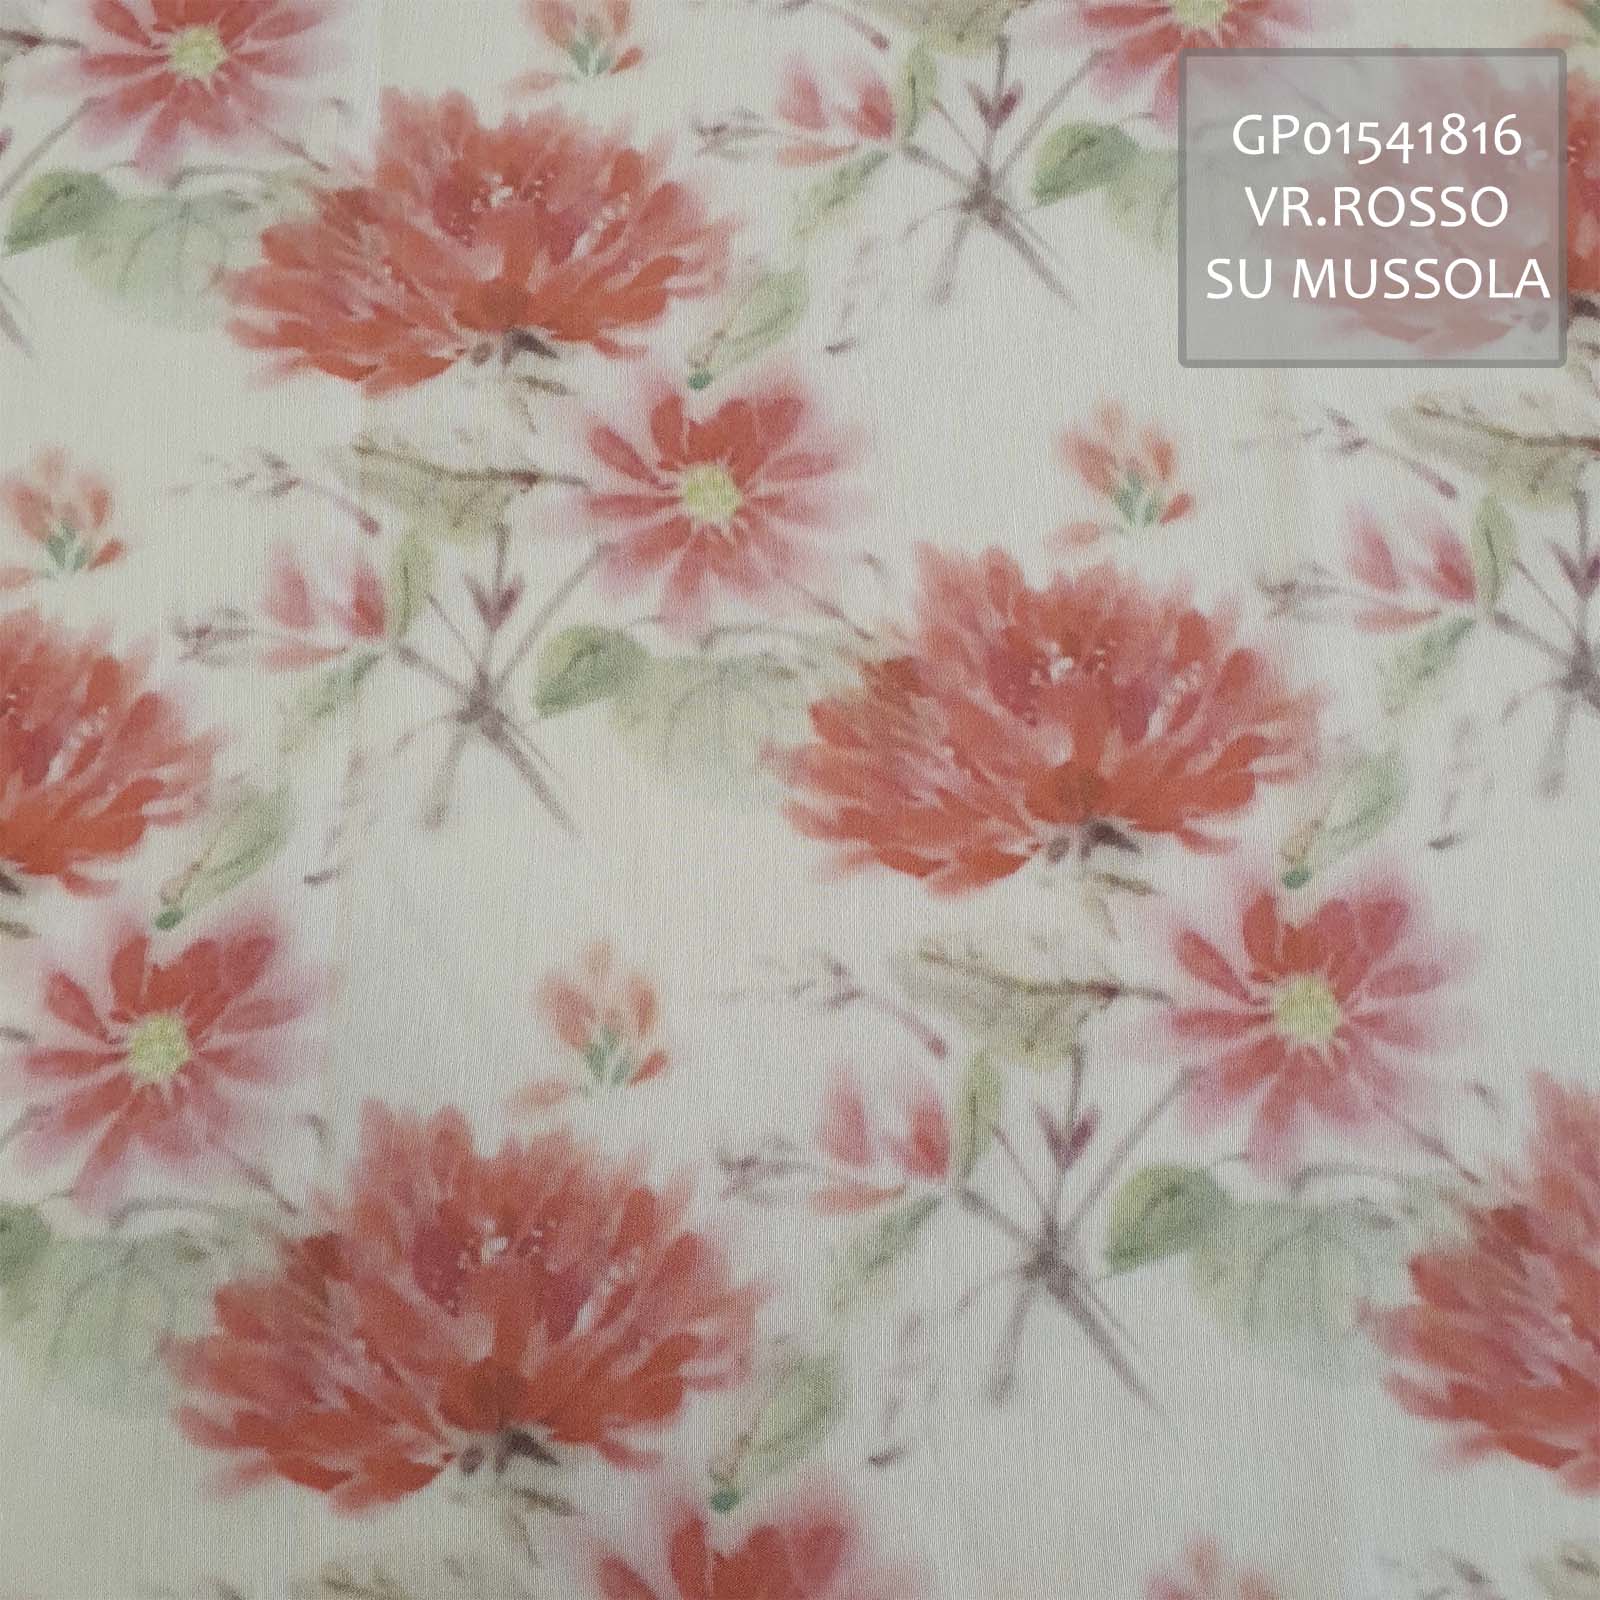 fabric print with digital pigment colourant, flowers style on muslin textile<br /> 100% Made in Italy fabric. Style classic with flowers decorations.

 Treatments: soft standard. Type of workings: muslin. 